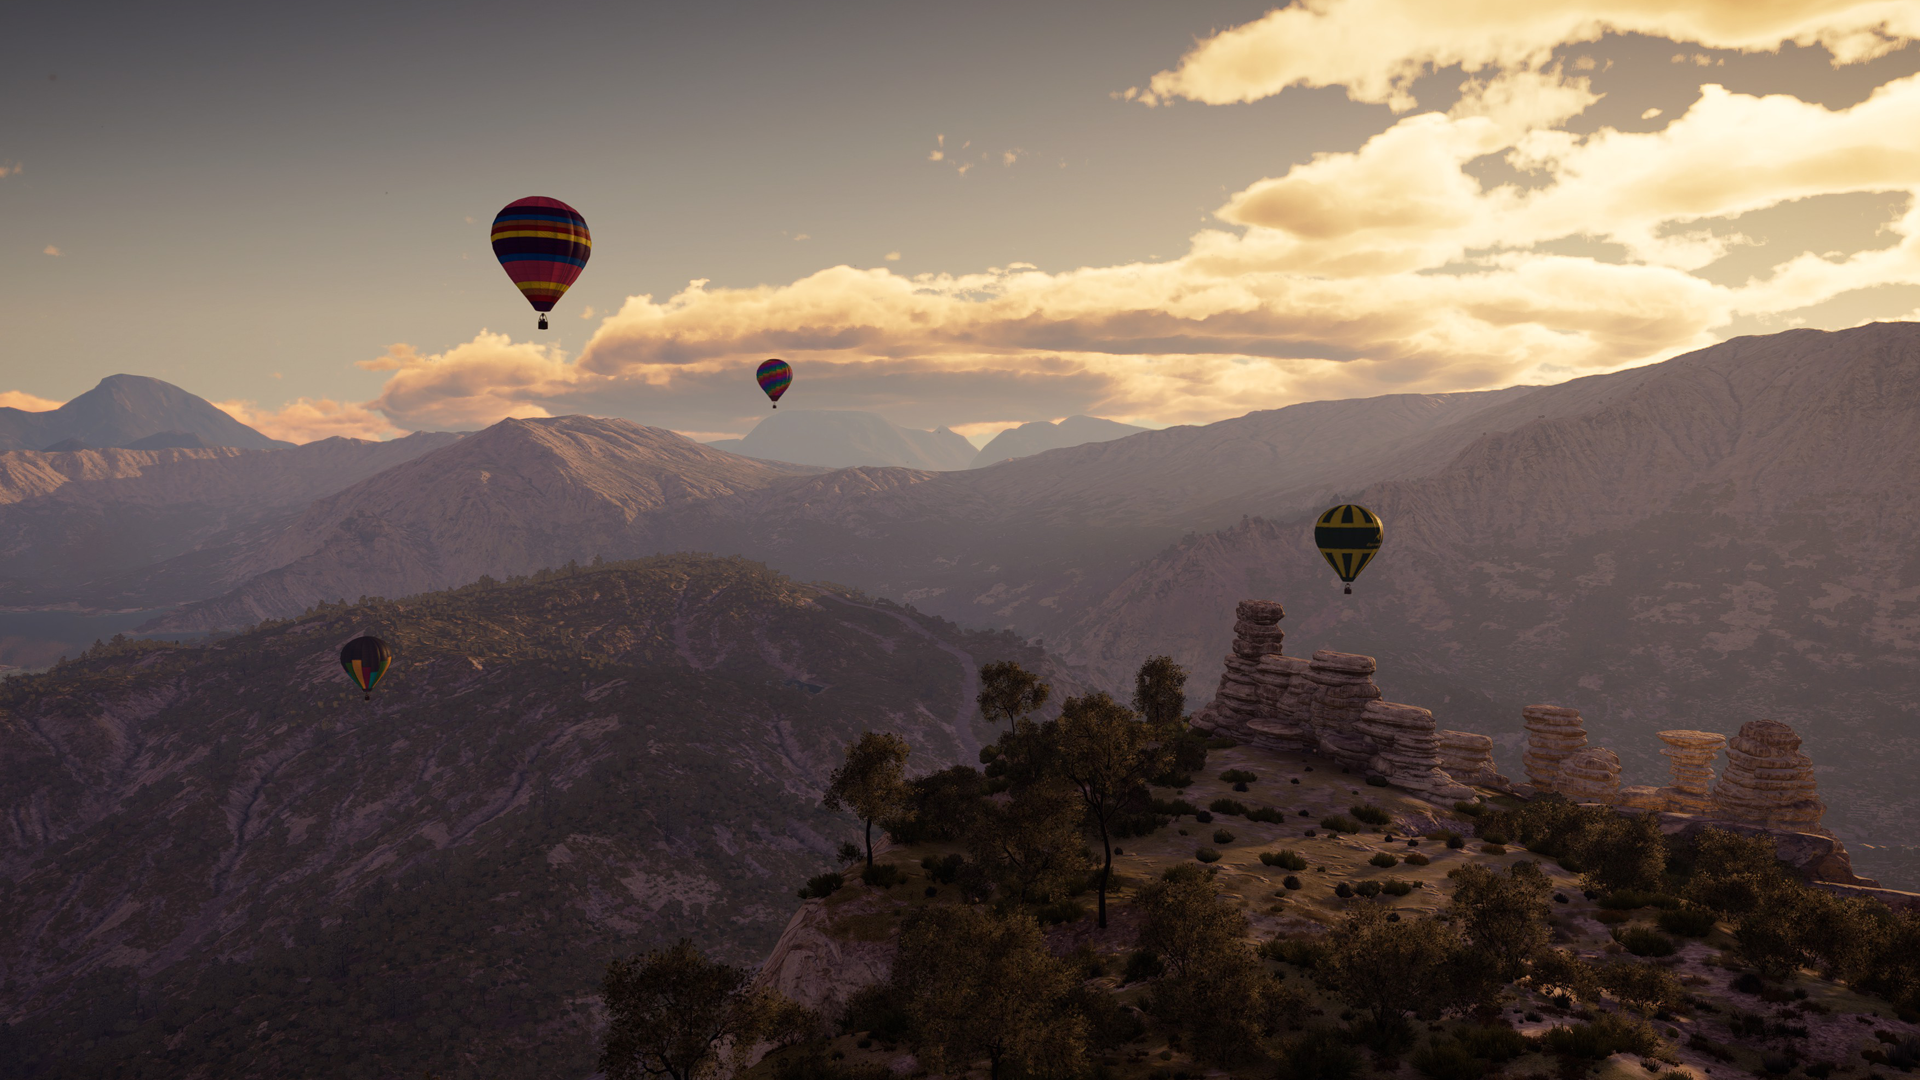 Destination: Spain - hot air balloons floating over the countryside.